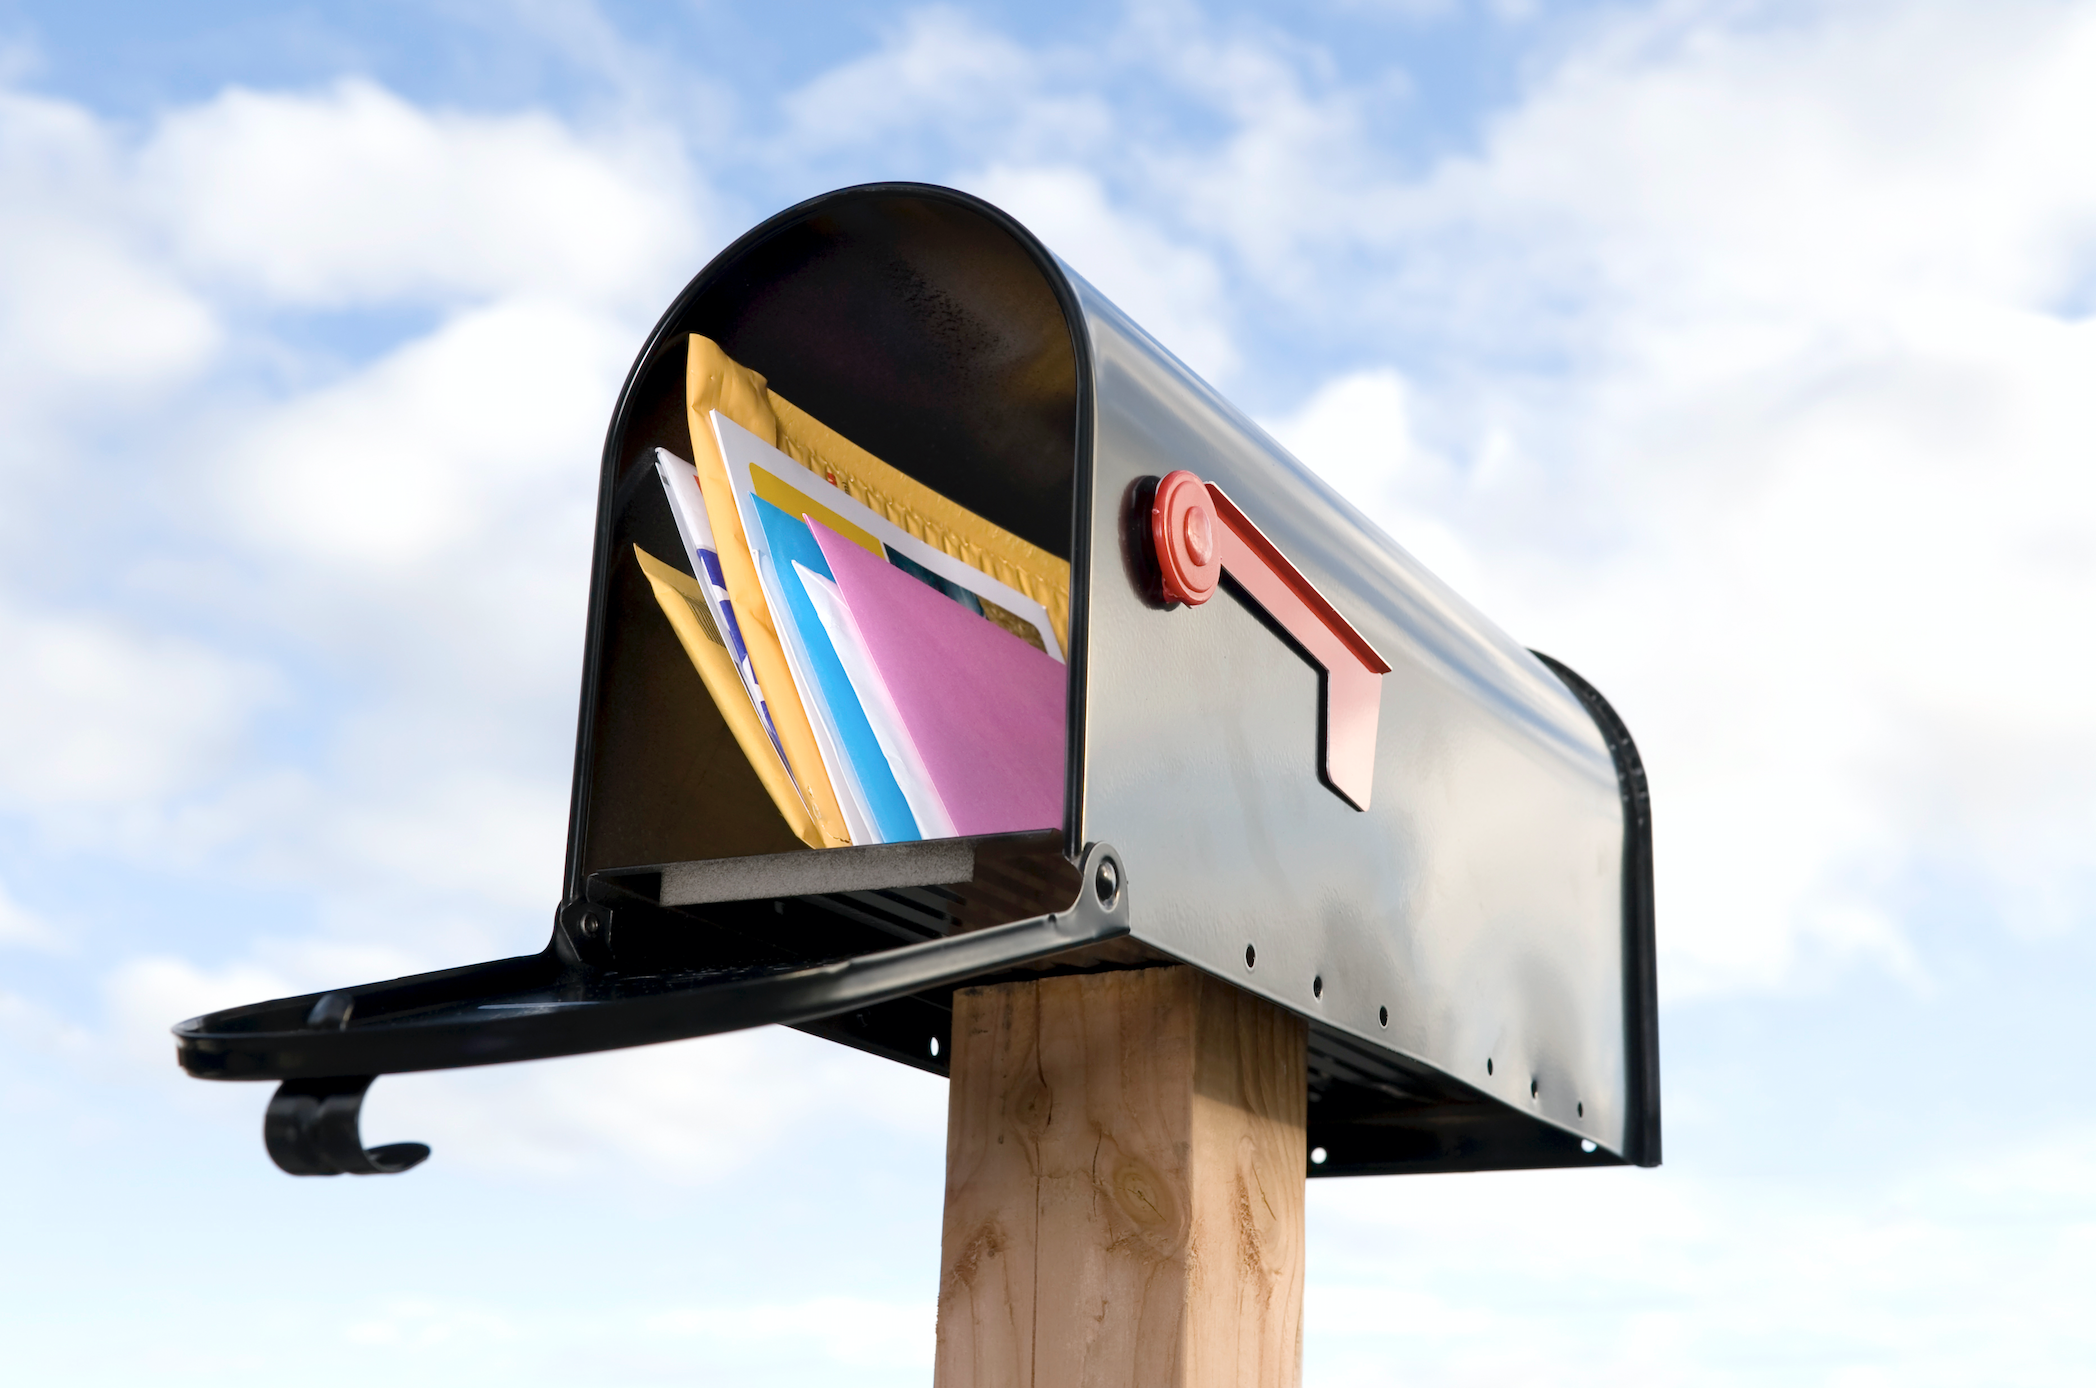 snail mail pen pals for adults